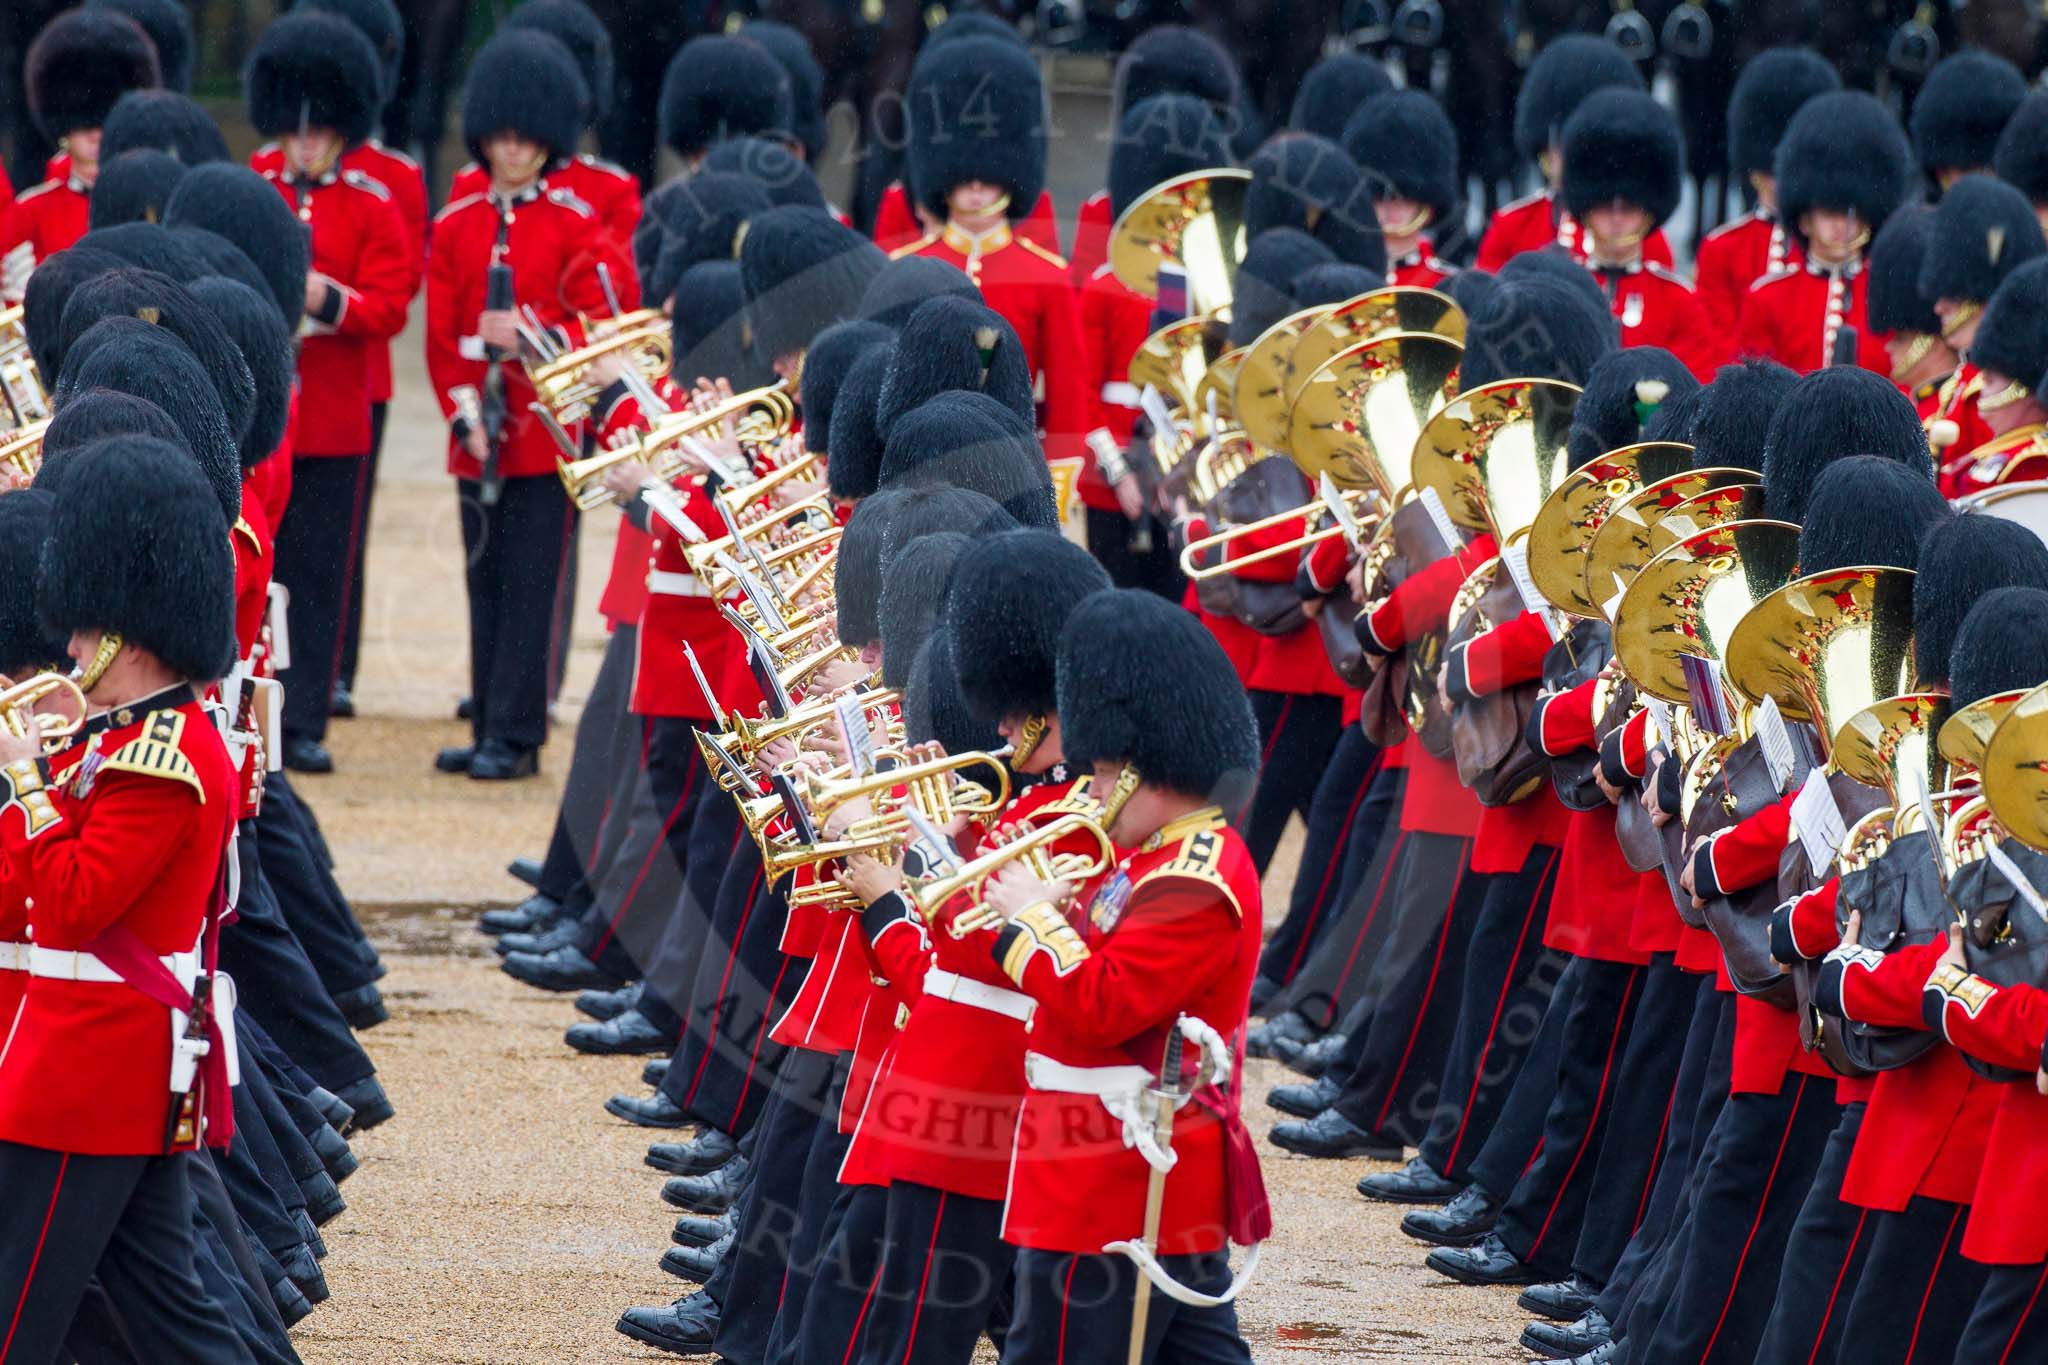 The Colonel's Review 2014.
Horse Guards Parade, Westminster,
London,

United Kingdom,
on 07 June 2014 at 11:23, image #426